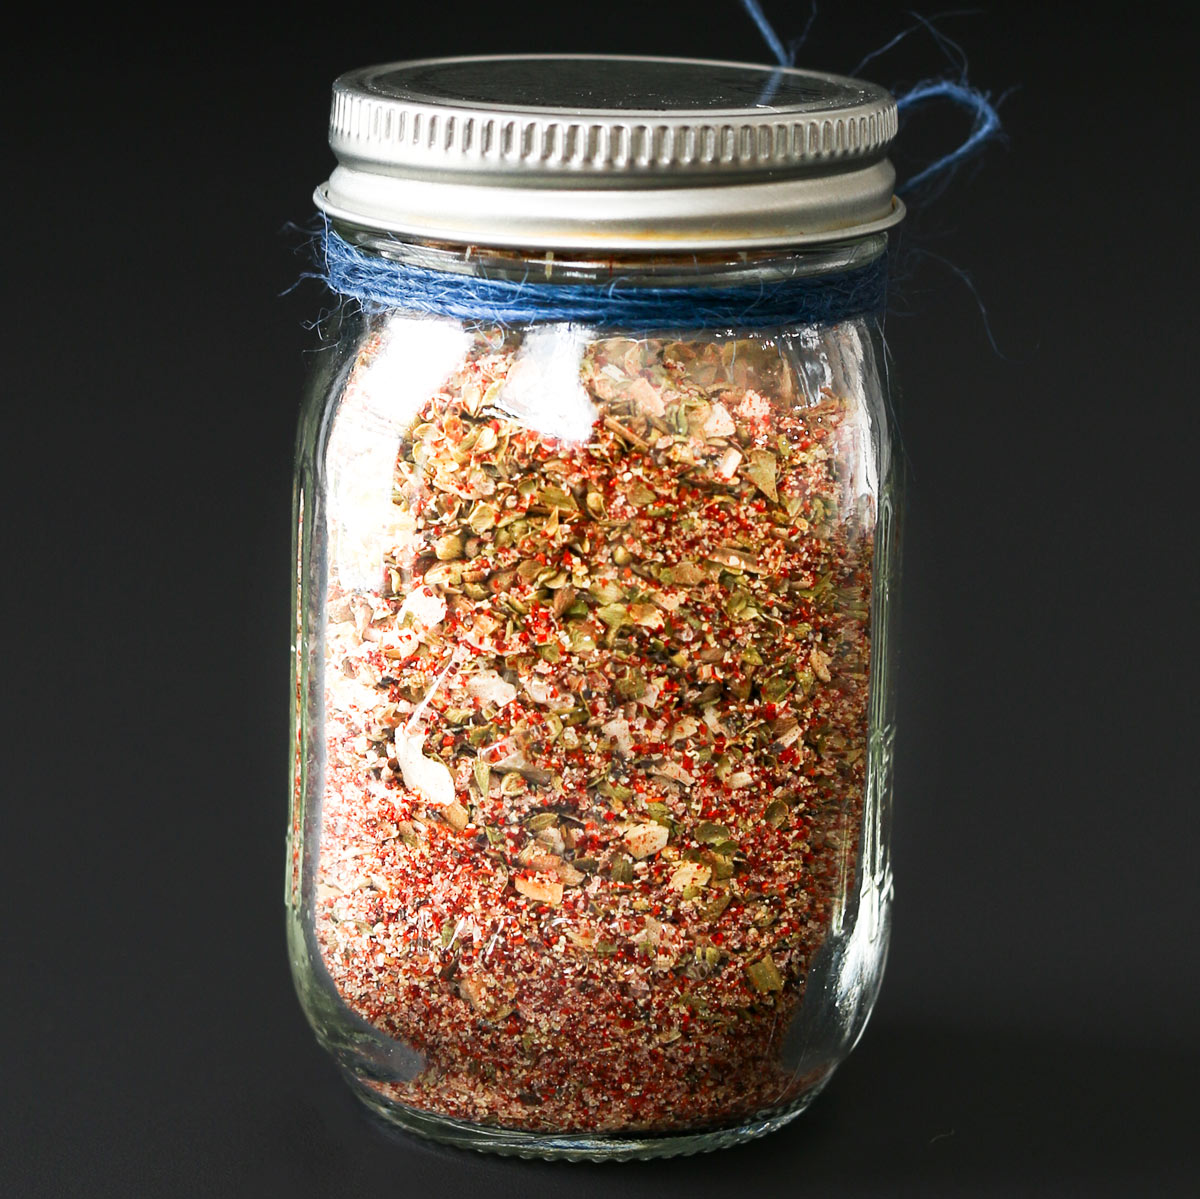 jar of taco spice mix with blue bakers twine around the neck.